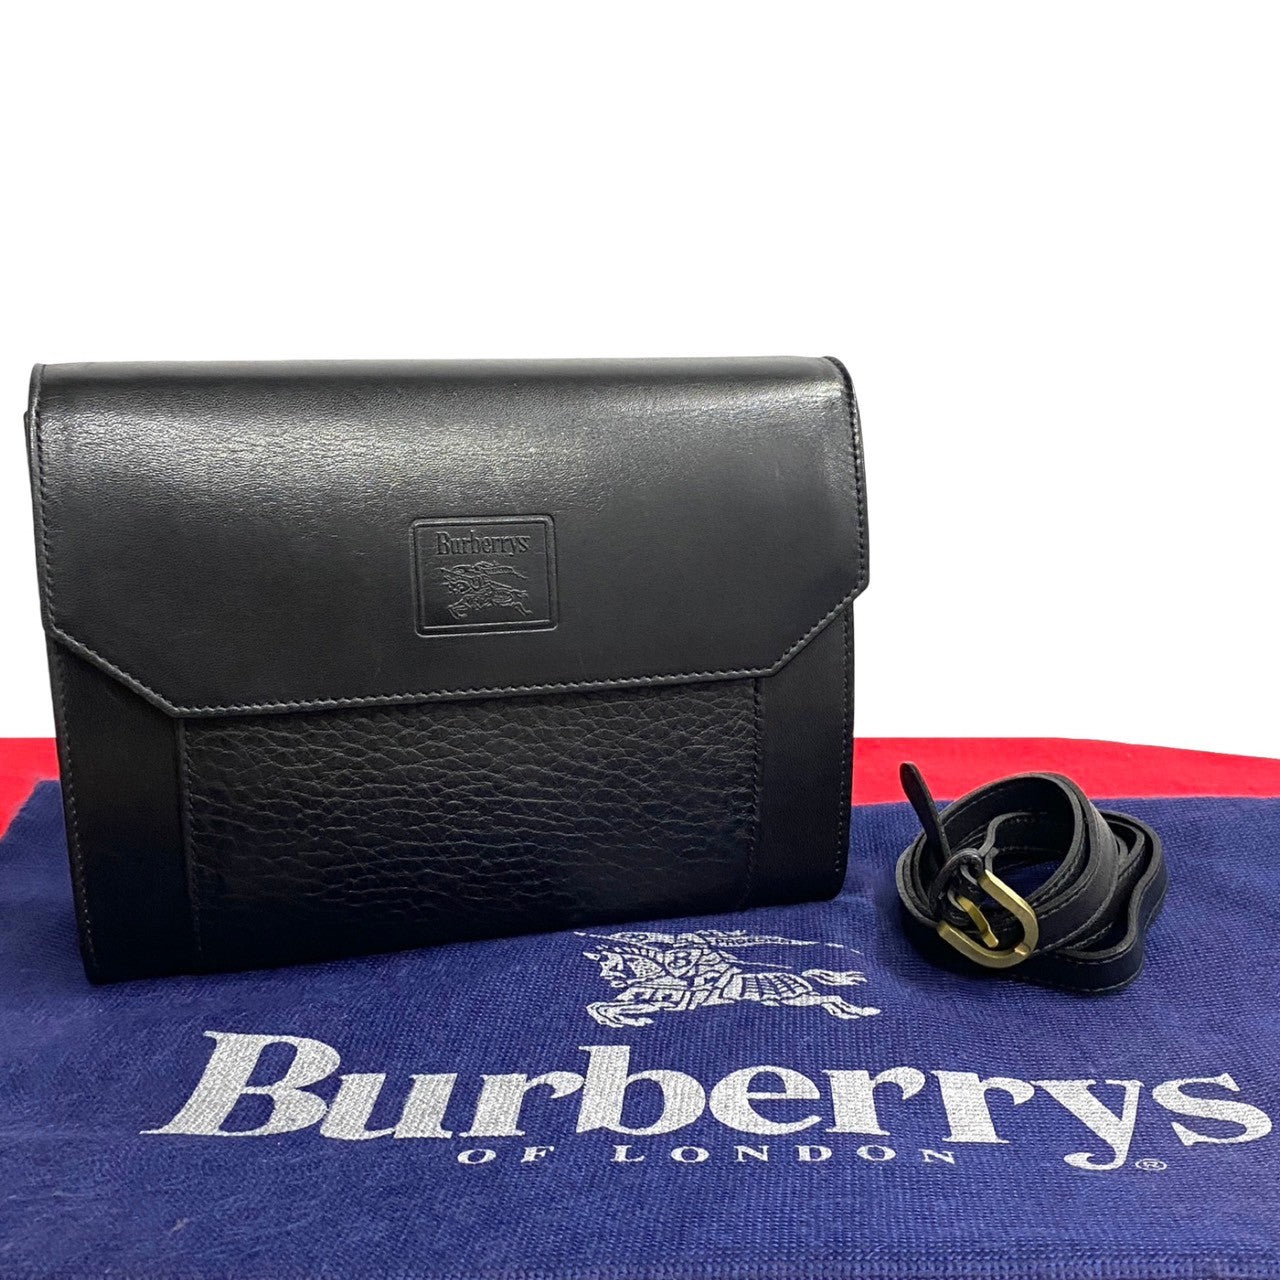 Burberry Leather Flap Crossbody Bag Leather Crossbody Bag in Good condition